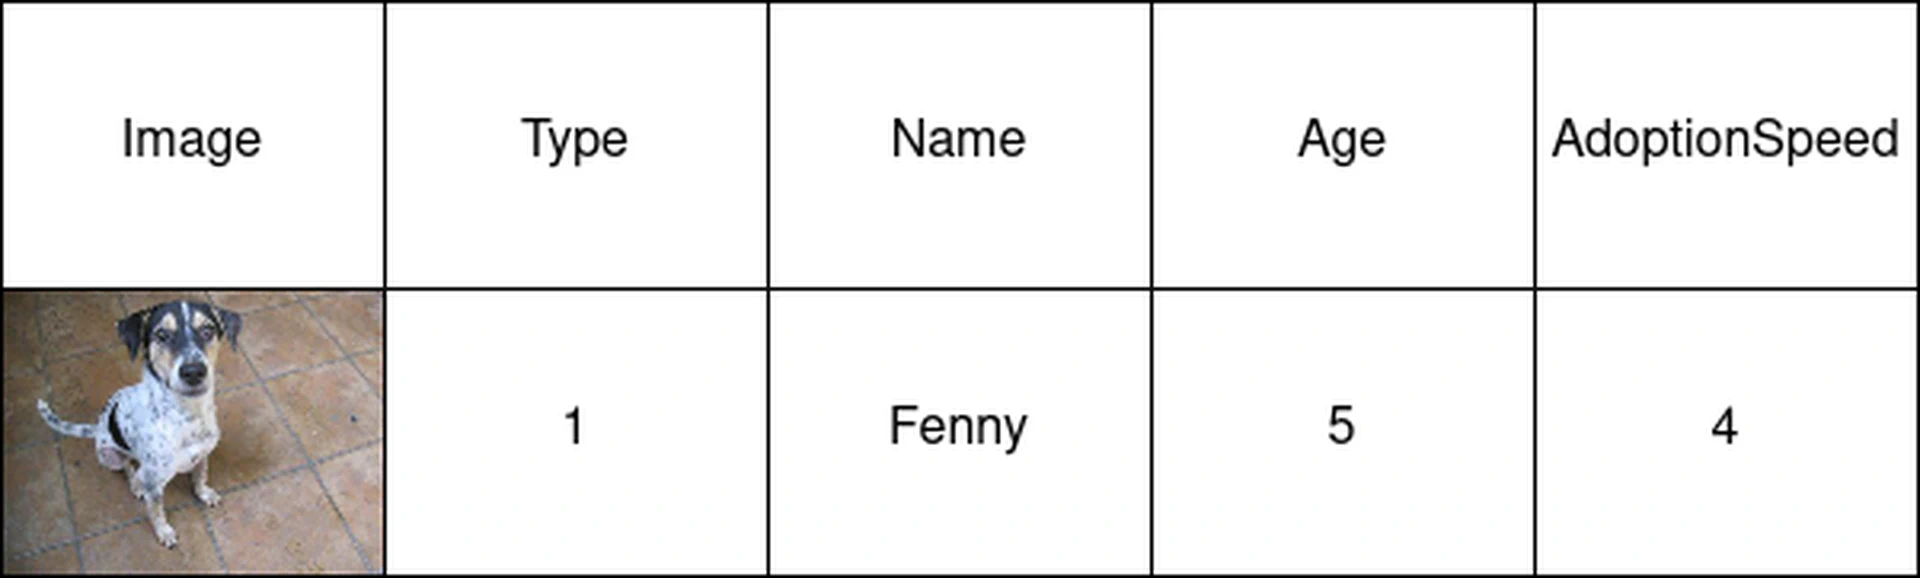 Example of a pet from the PetFinder dataset [14]. Fenny is a 5-year-old dog (Type 1) that has not been adopted within 100 days (AdoptionSpeed 4)